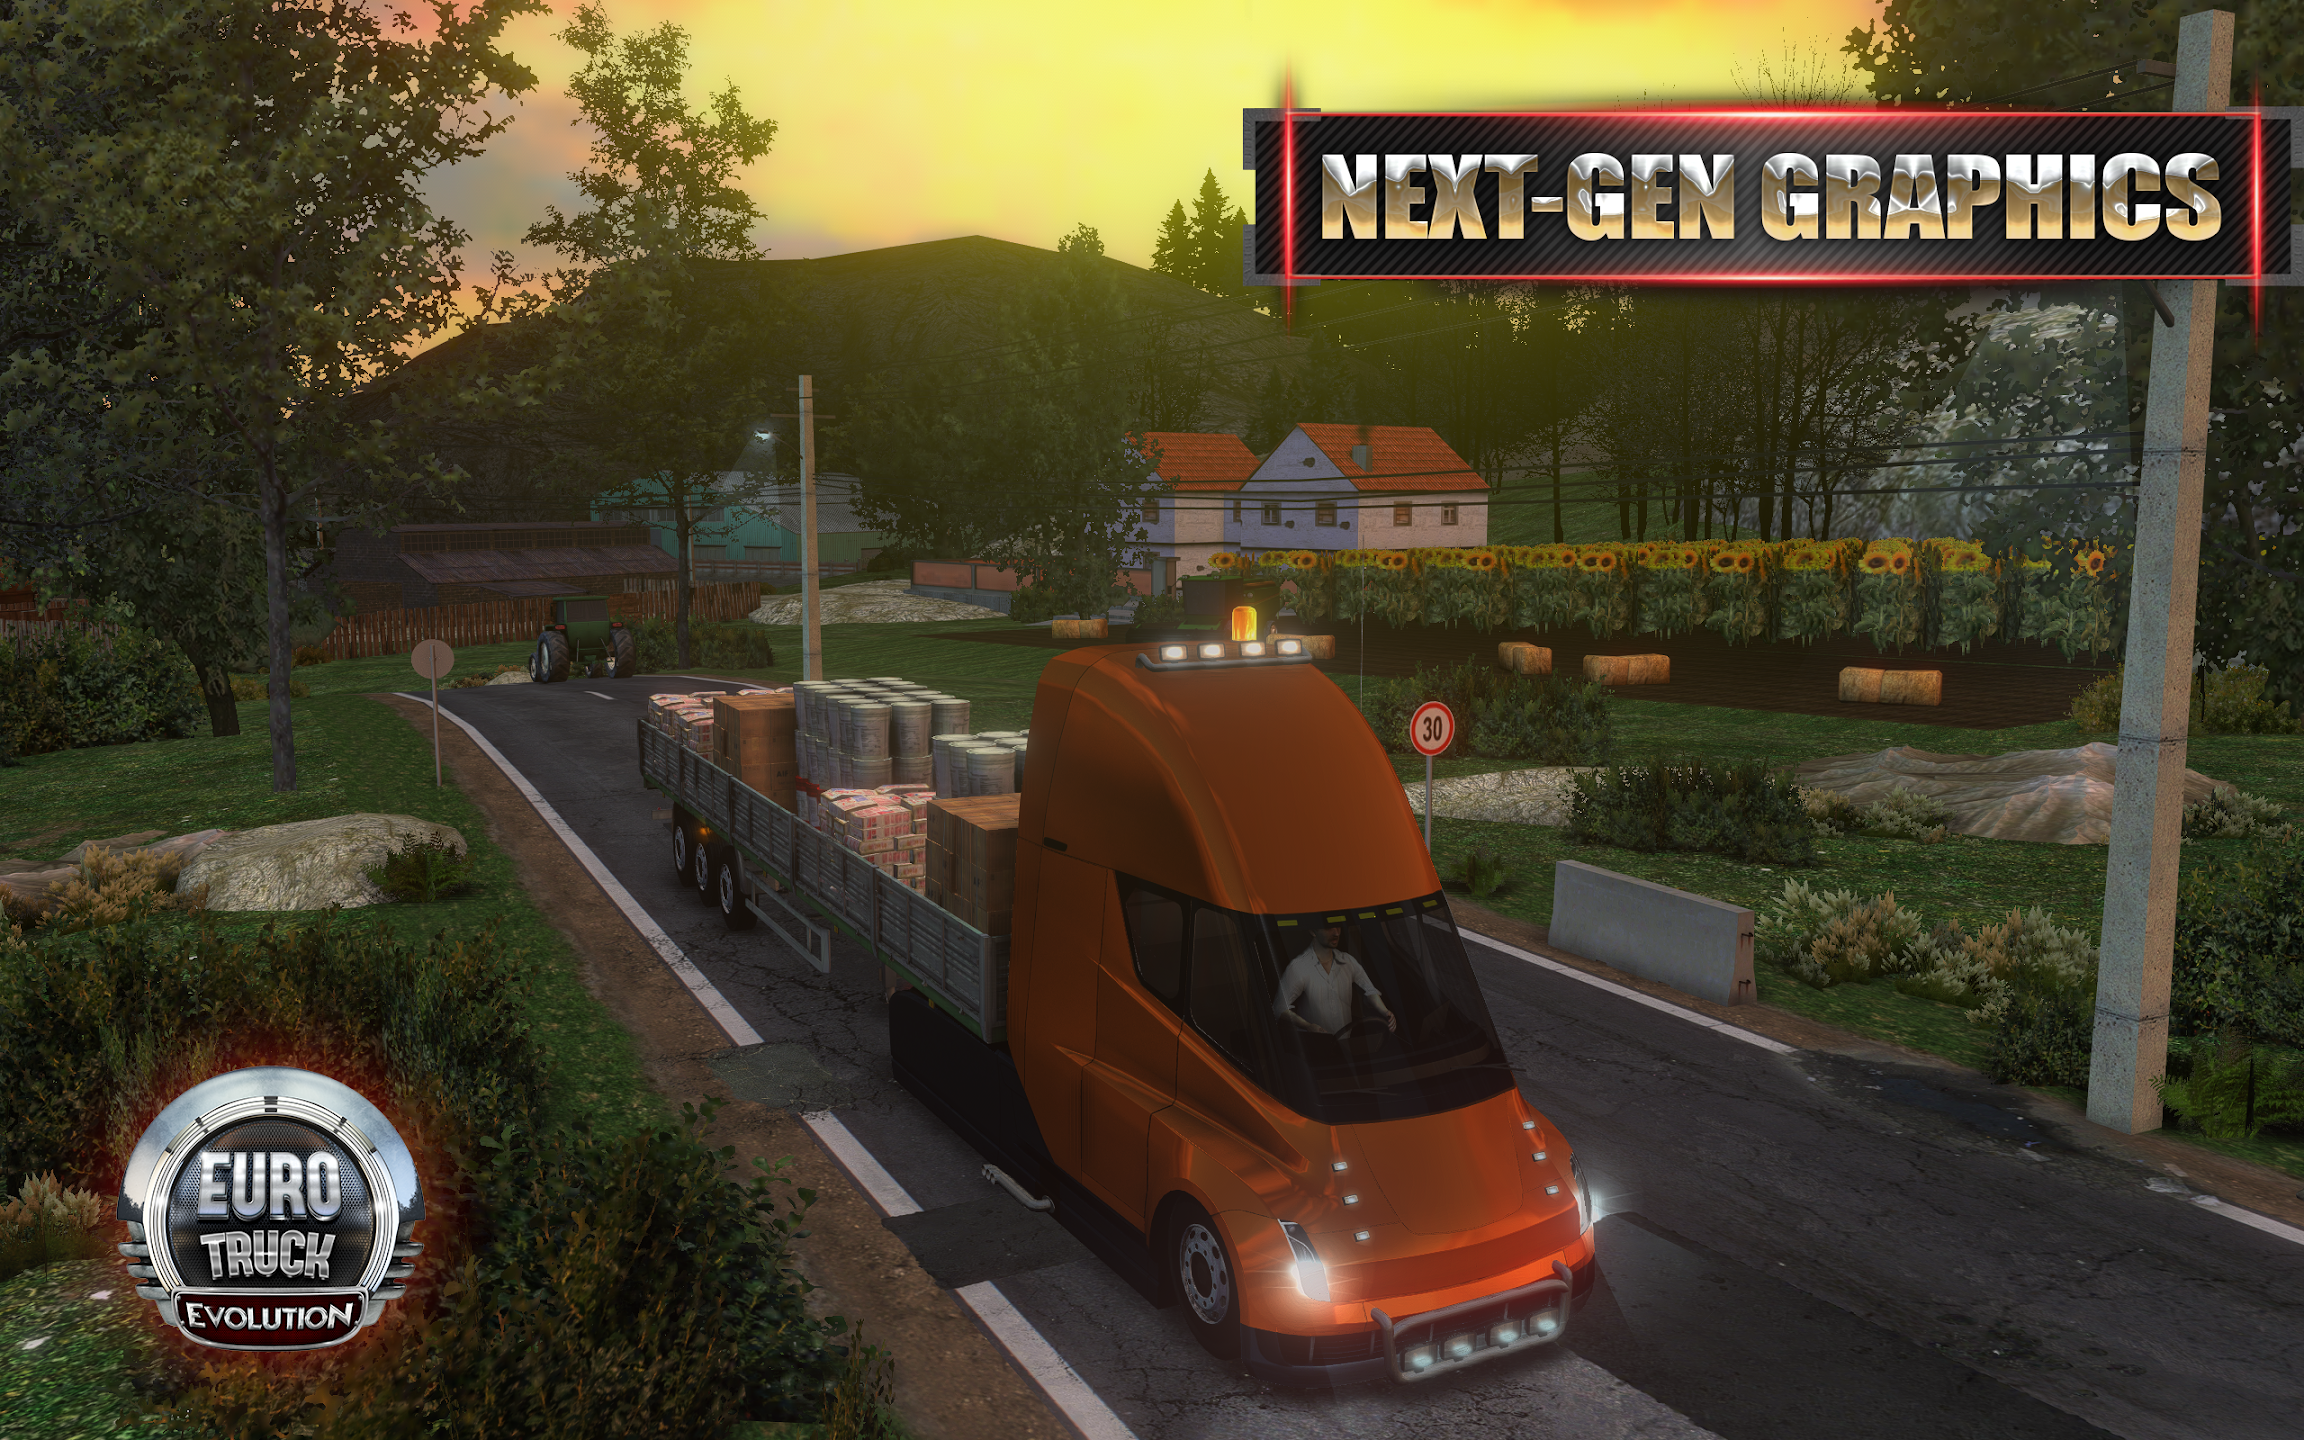 Euro Truck Evolution is a realistic simulation game